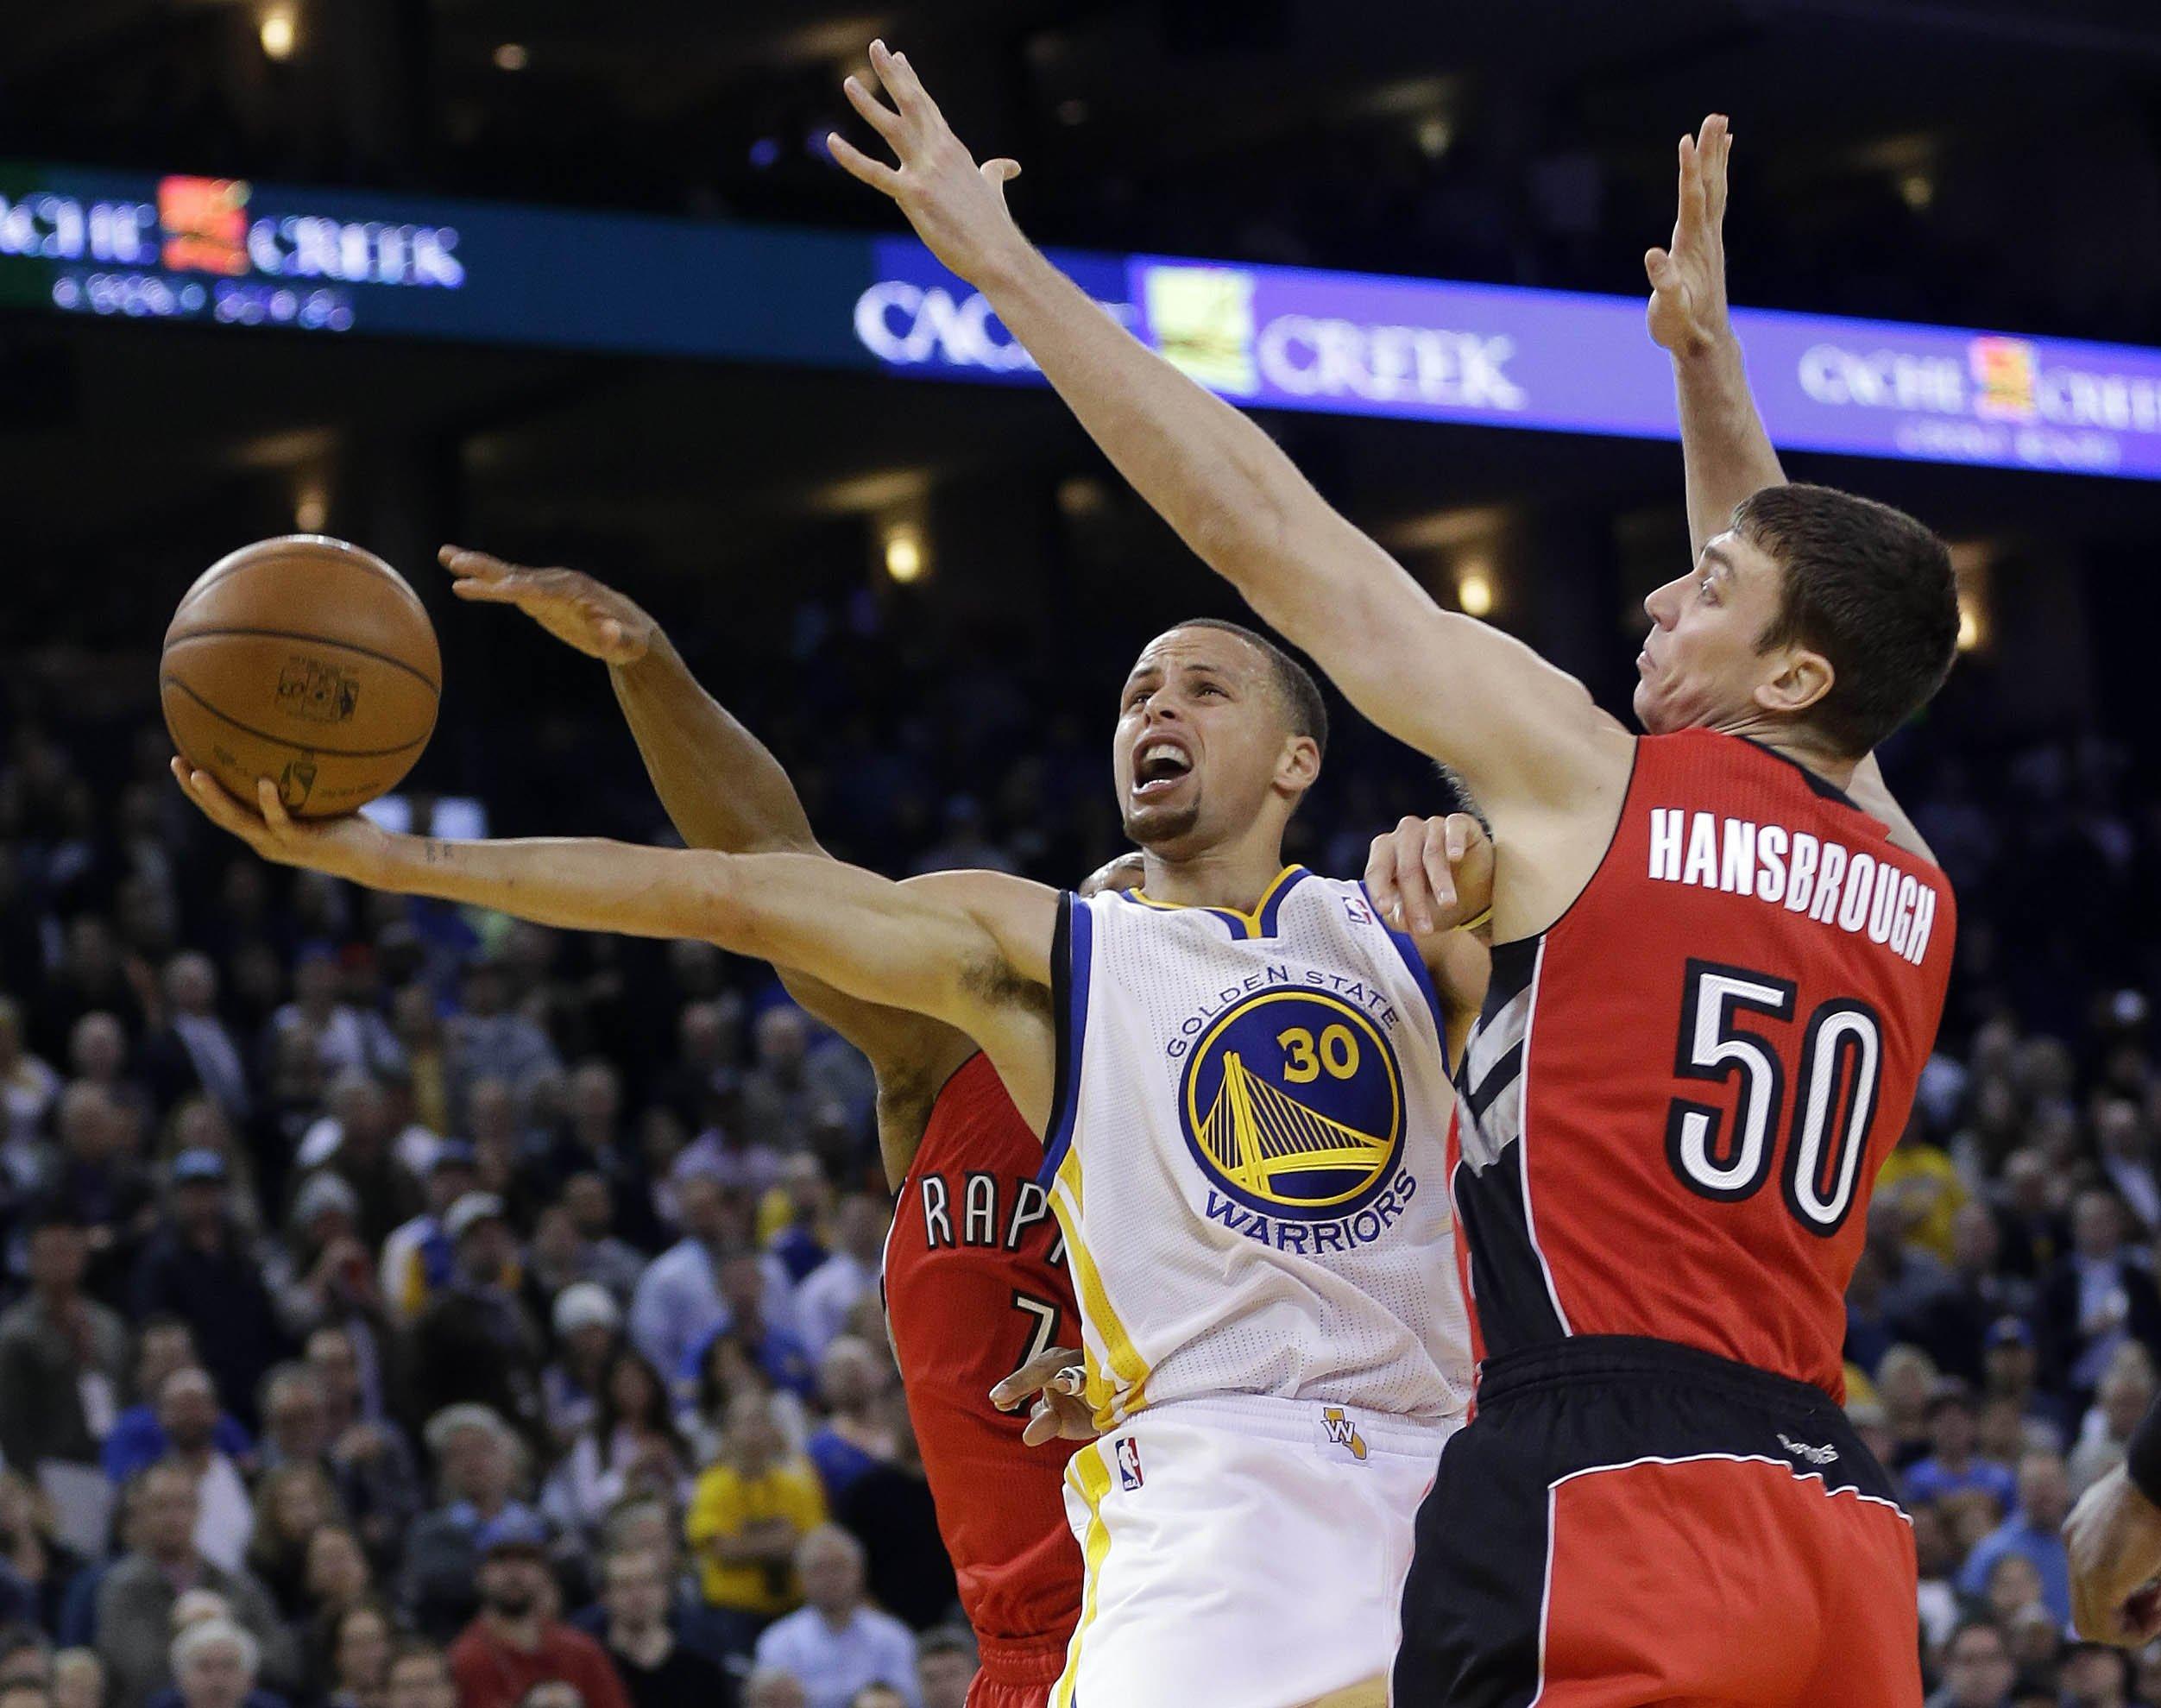 The Golden State Warriors came back from a 27-point deficit against the Toronto Rapters, one of their biggest comebacks.